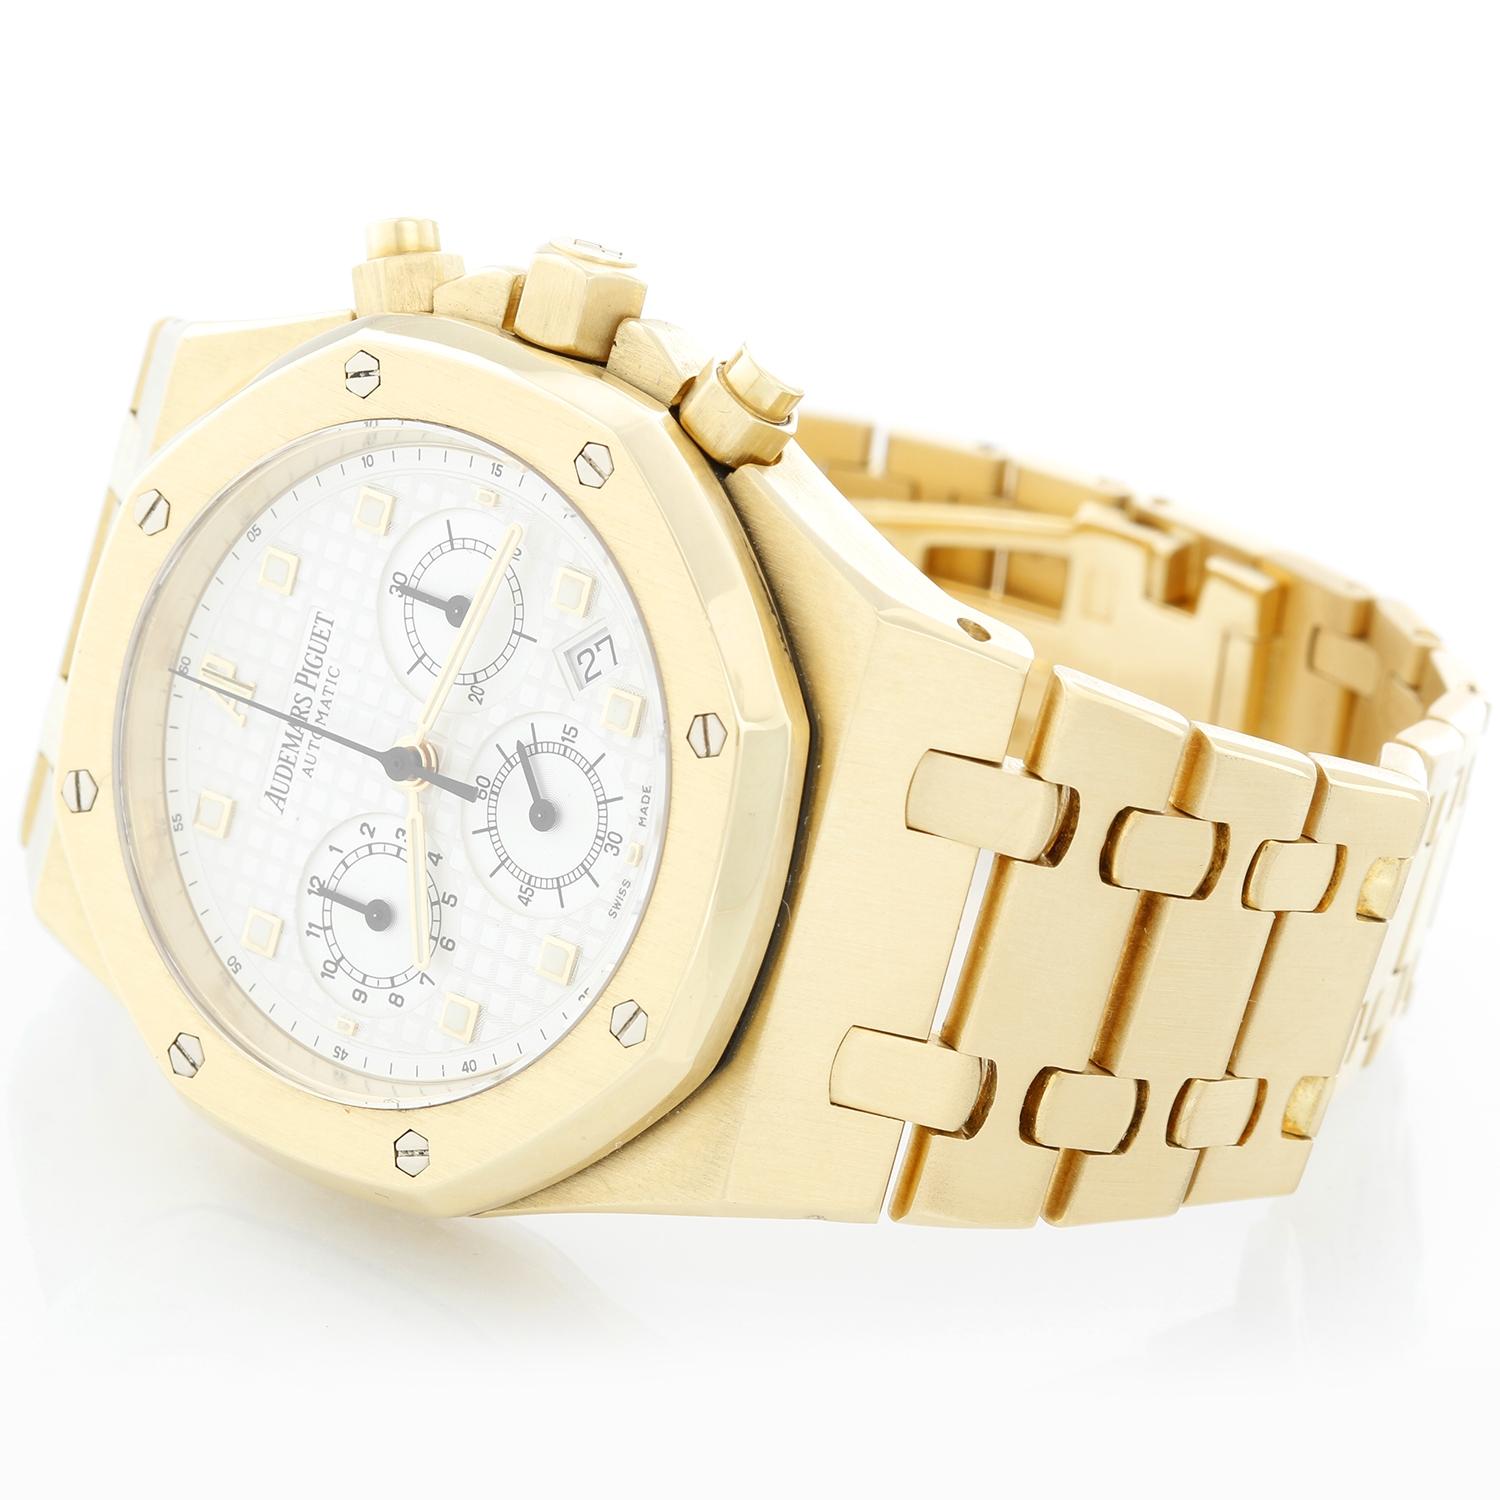 Audemars Piguet Royal Oak Chronograph Men's 18k Yellow Gold Watch 25960BA/O/1185BA/01 - Automatic winding chronograph with date. 18k yellow gold case (39mm diameter). Ivory colored waffle textured dial; gold and luminous style hour markers; date